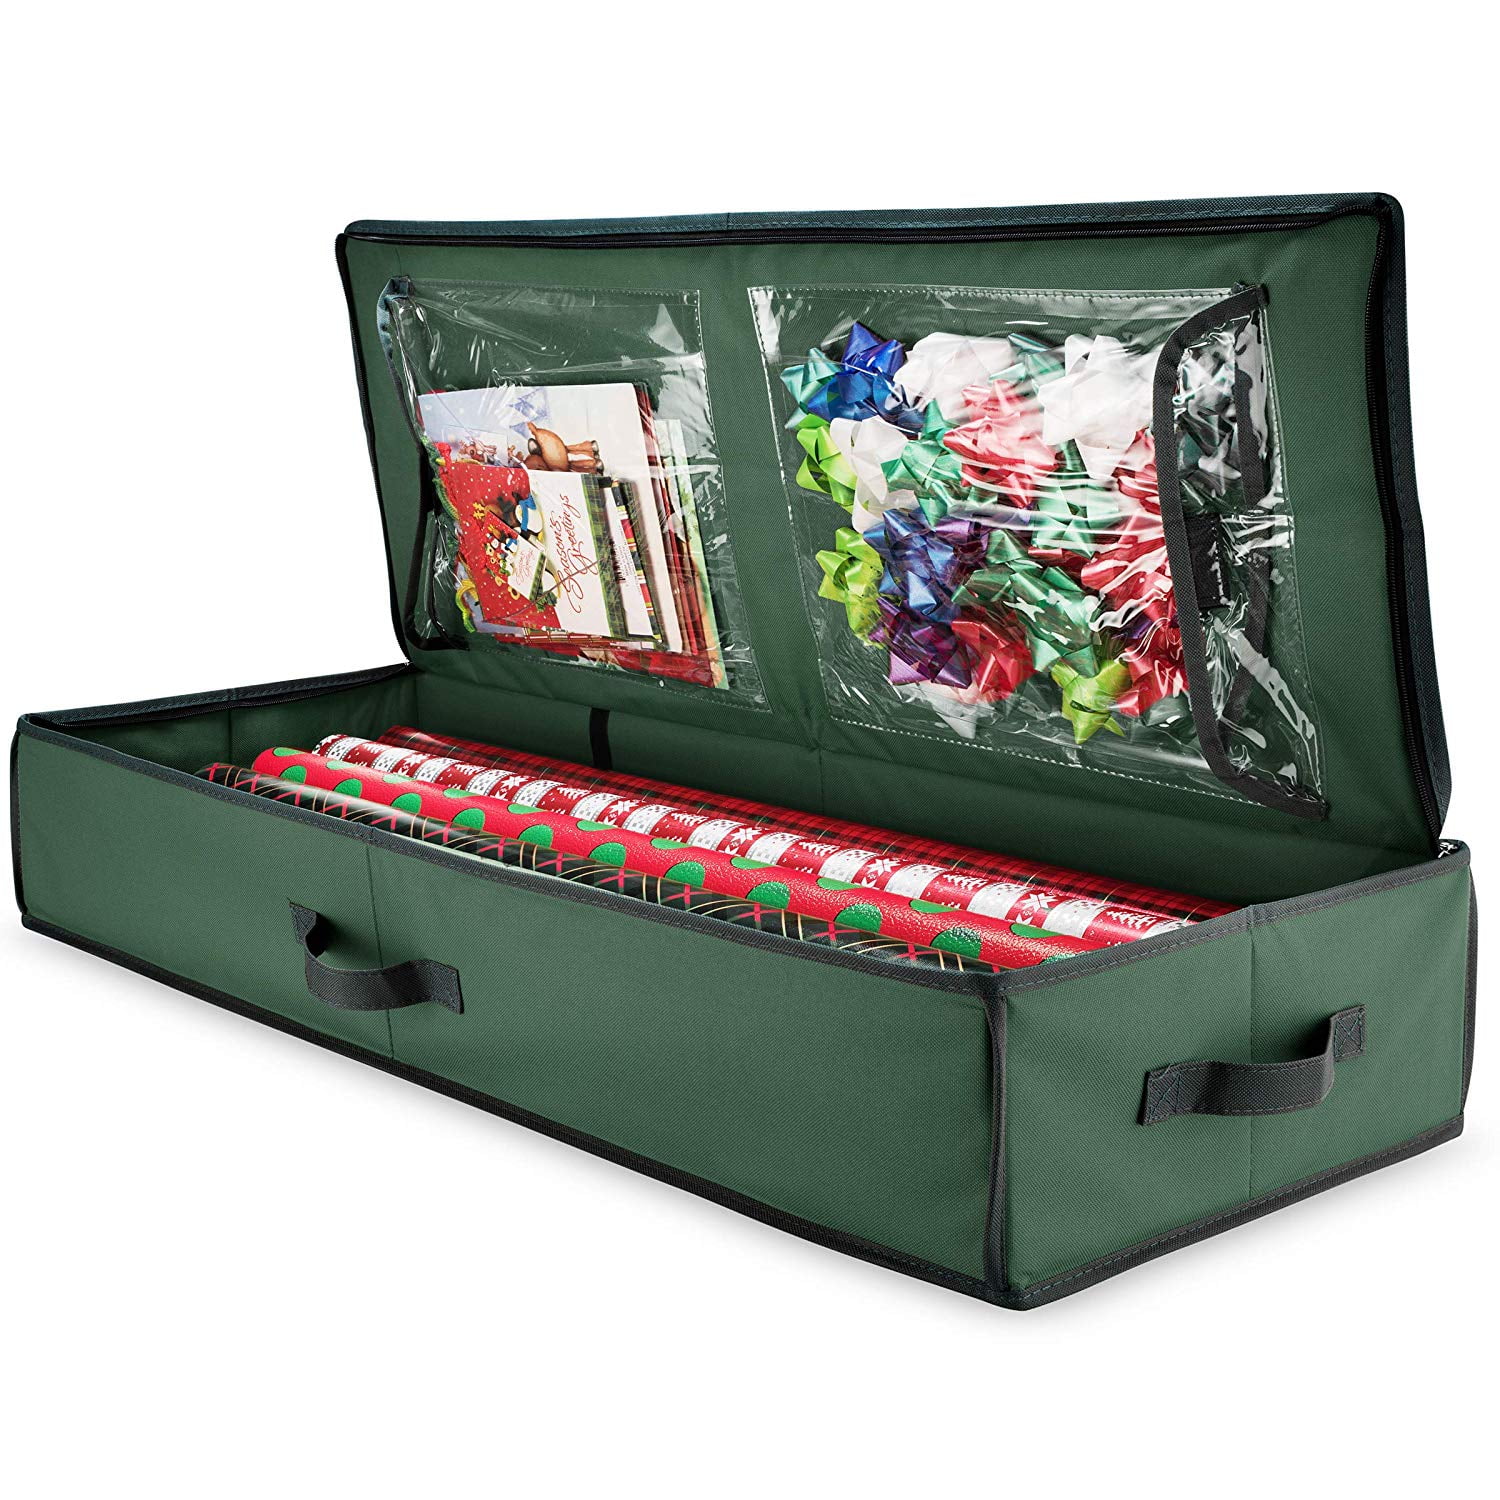 Zober Christmas Wrapping Paper Storage Box With Inside Pockets, 600D